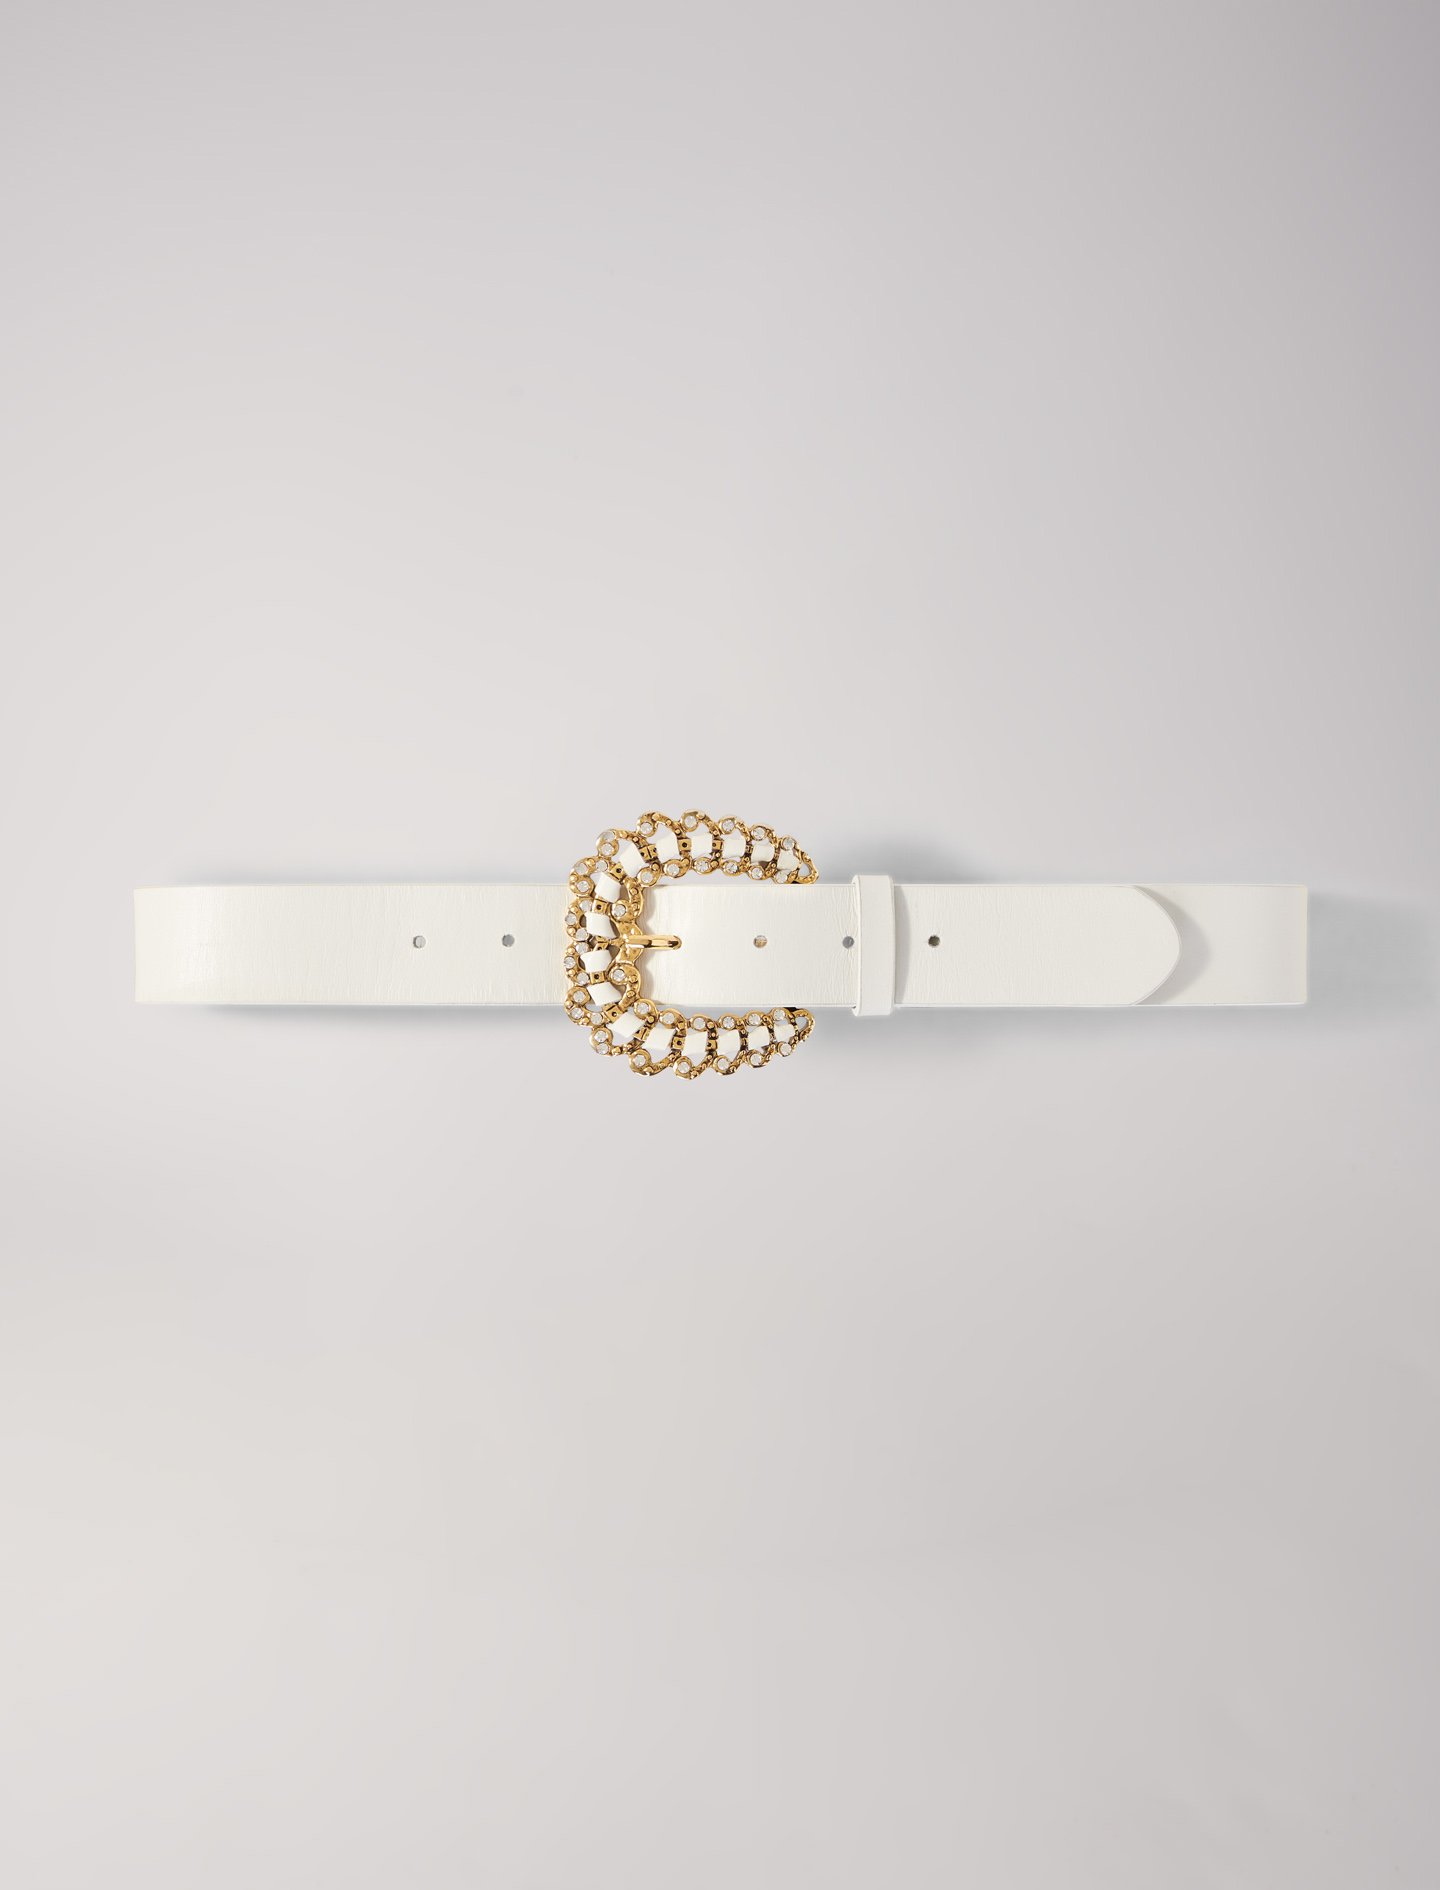 Maje Woman's polyester, Belt with diamanté buckle for Spring/Summer, in color Ecru / Beige